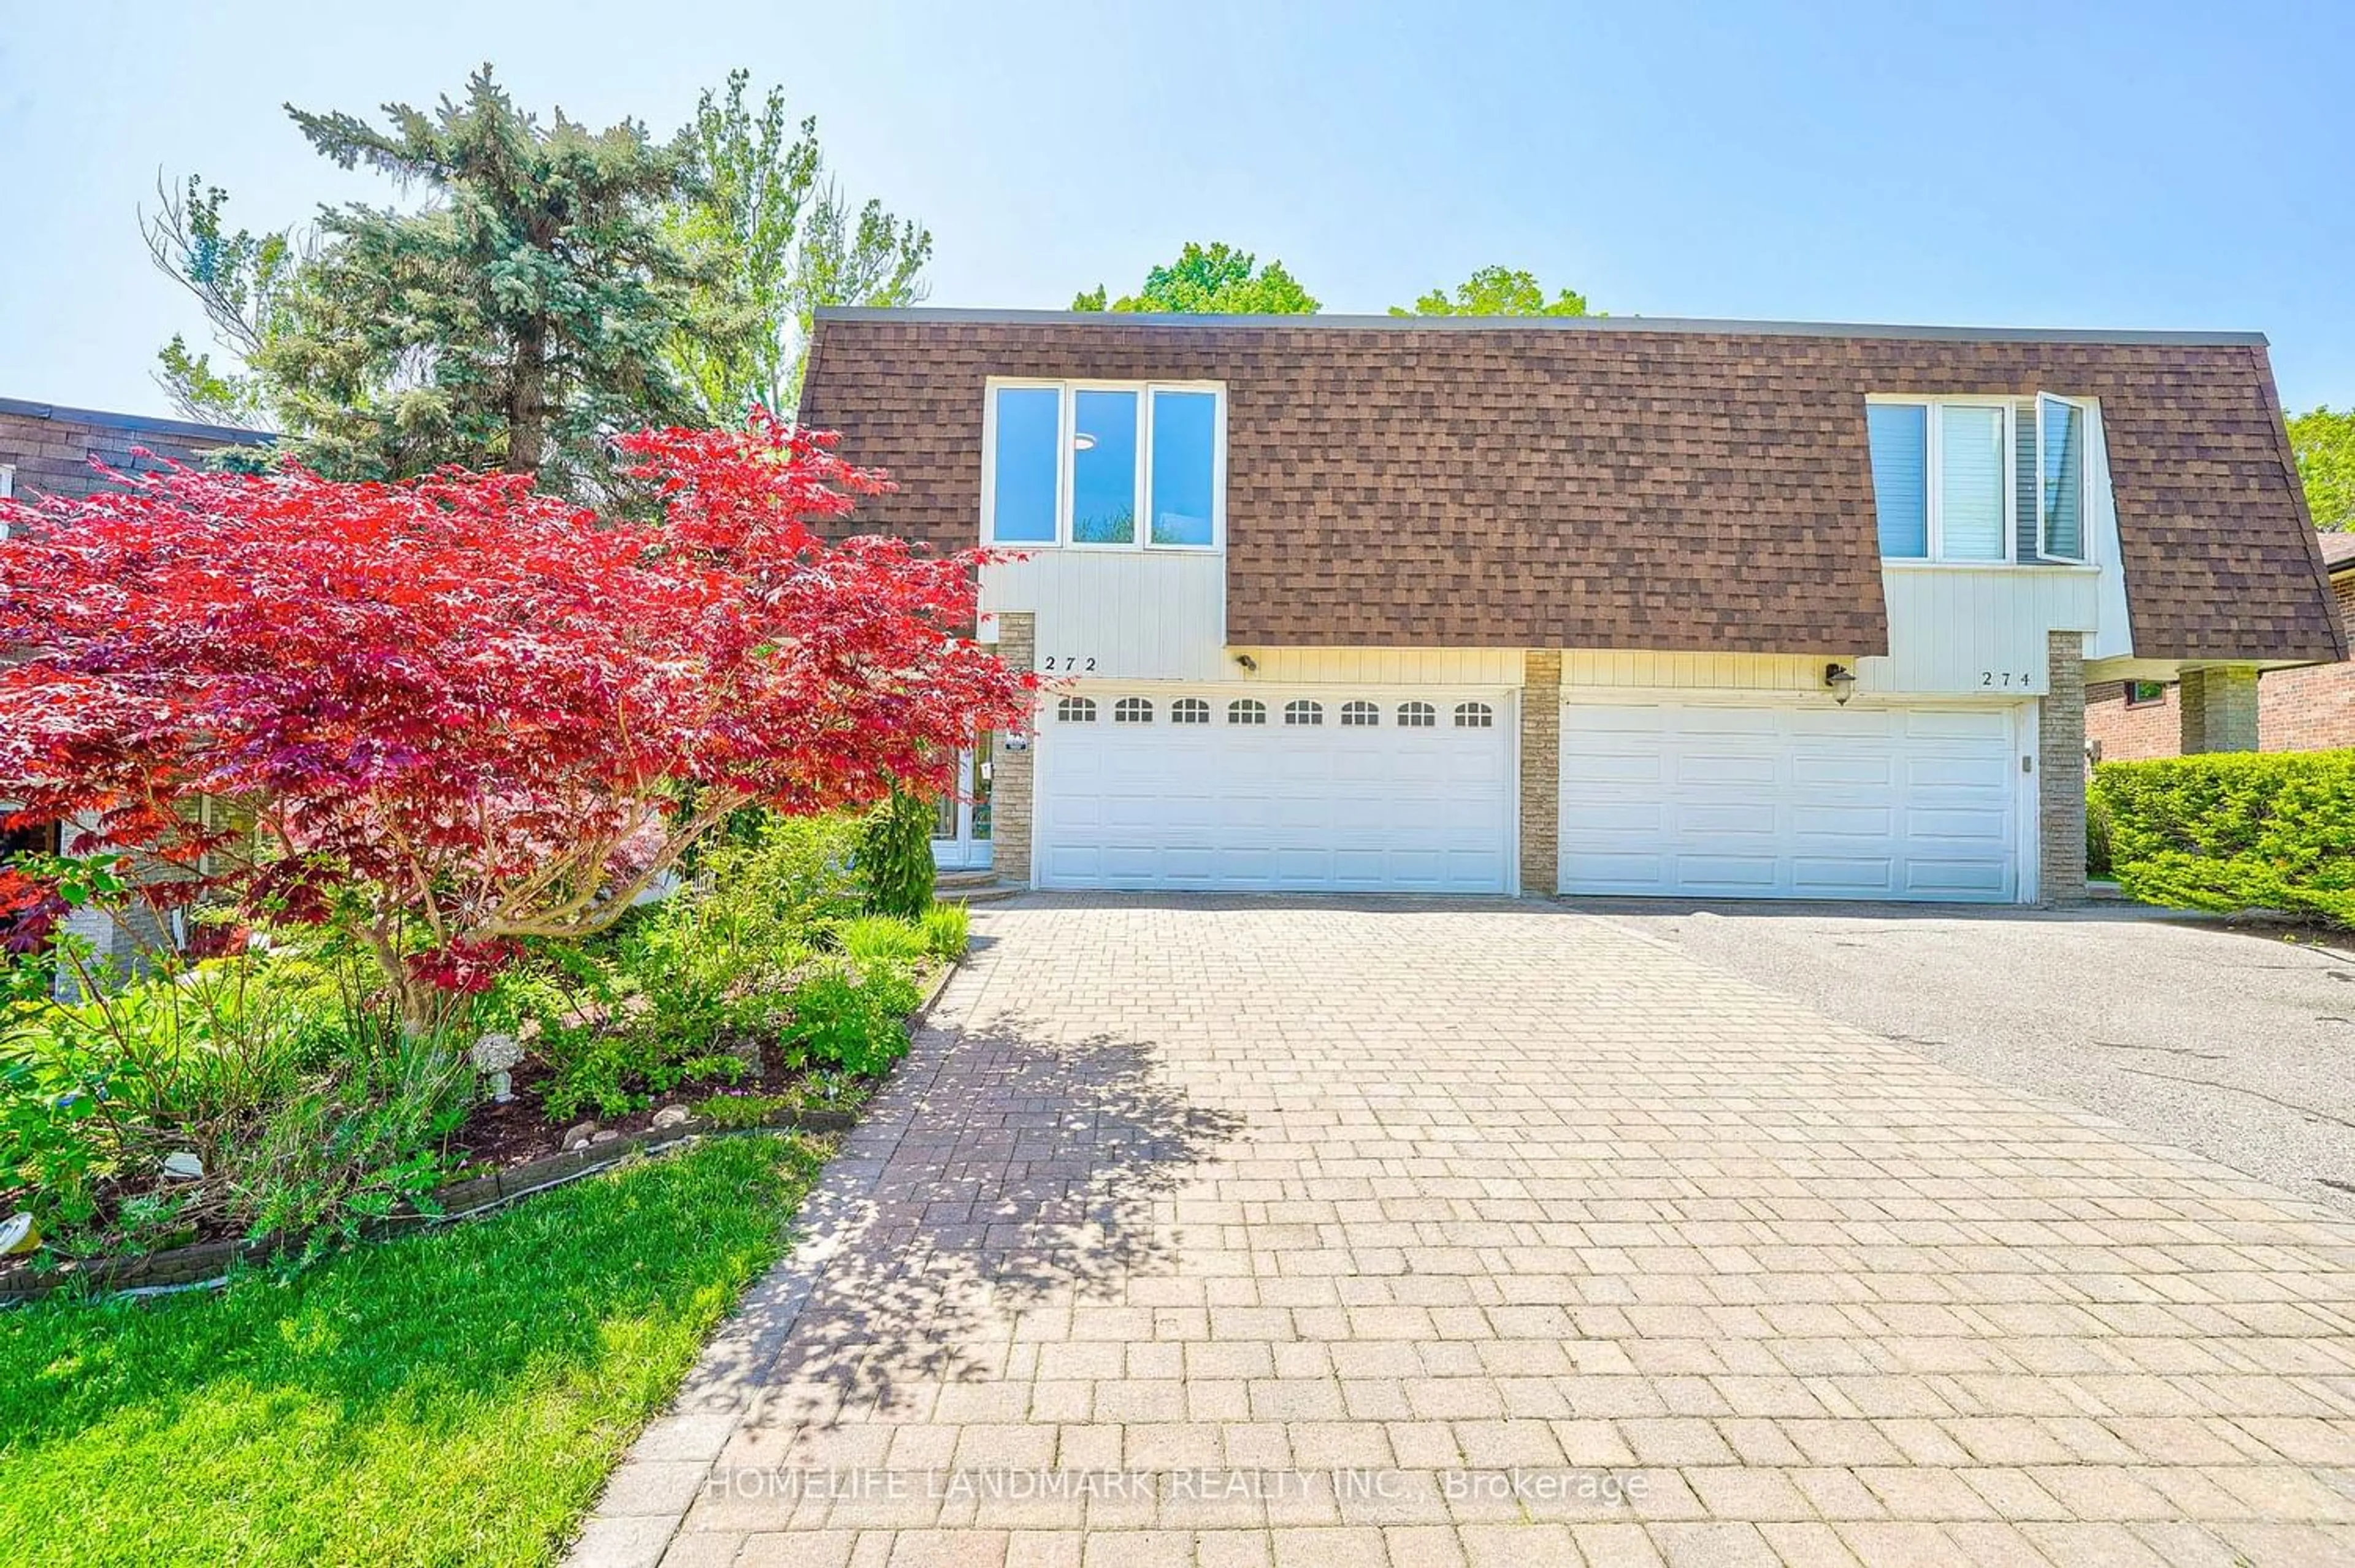 Home with brick exterior material for 272 Goldenwood Rd, Toronto Ontario M2M 4A6